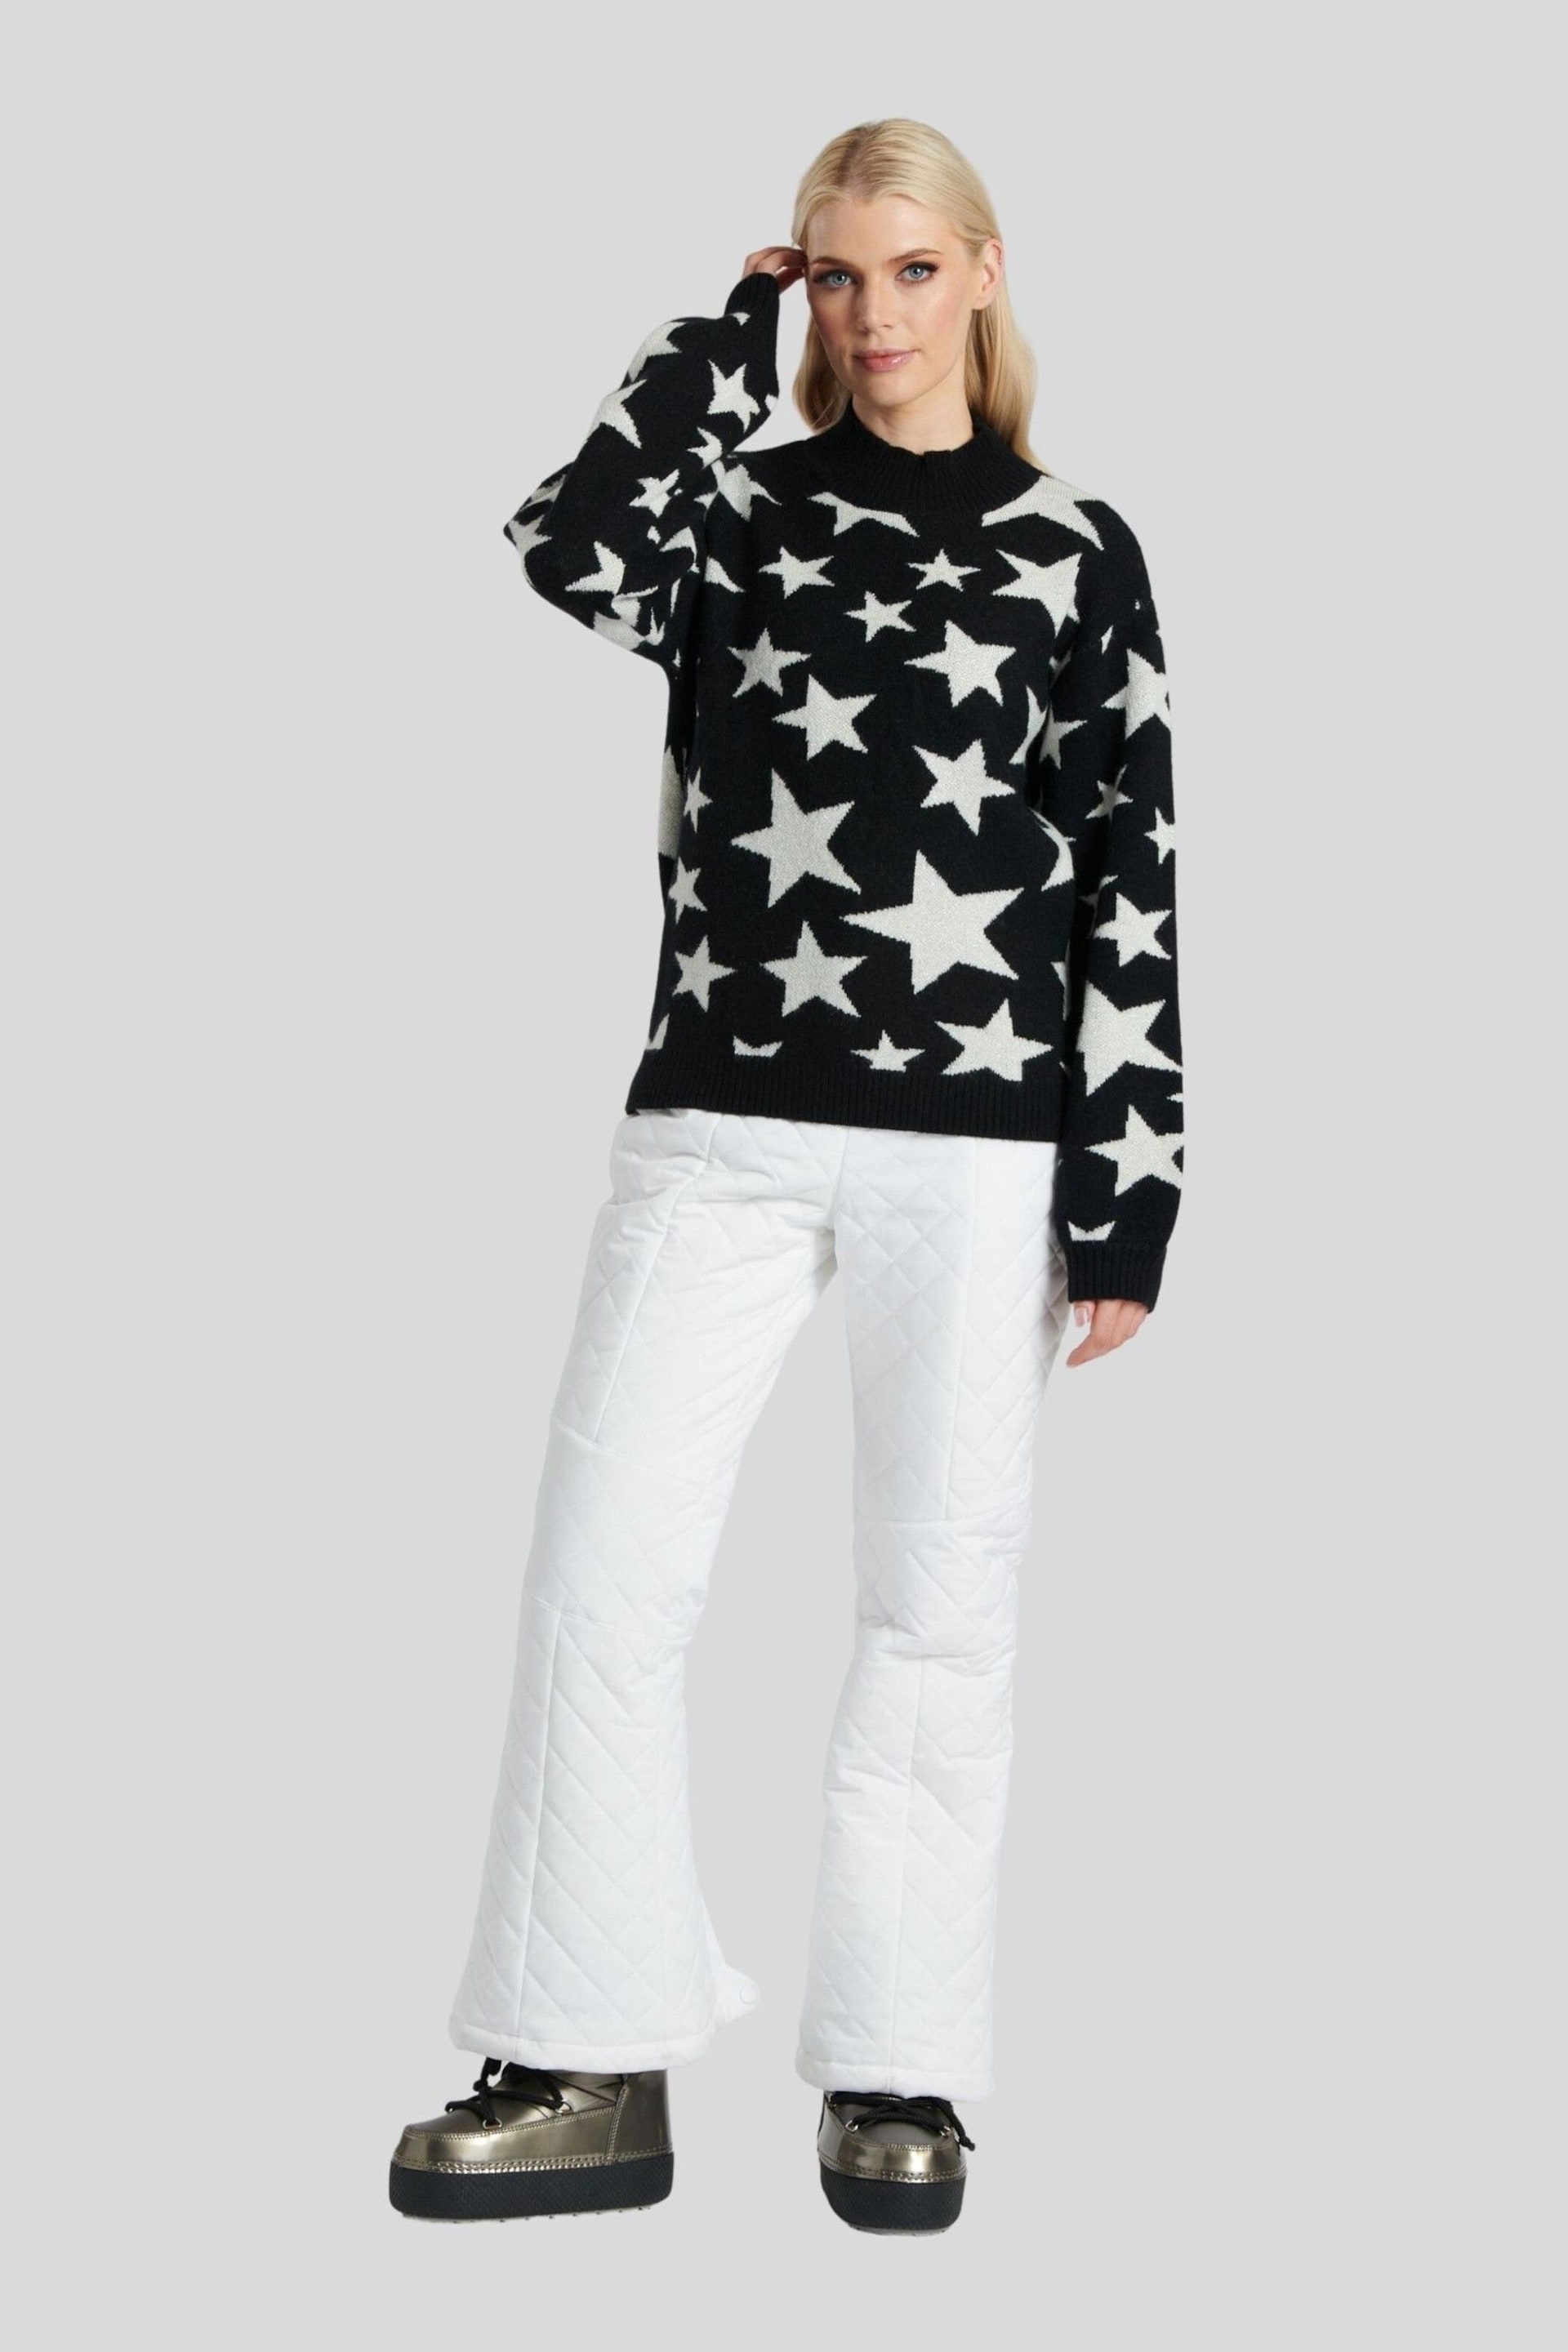 South Beach Silver Funnel Neck Knit Jumper - Image 5 of 6